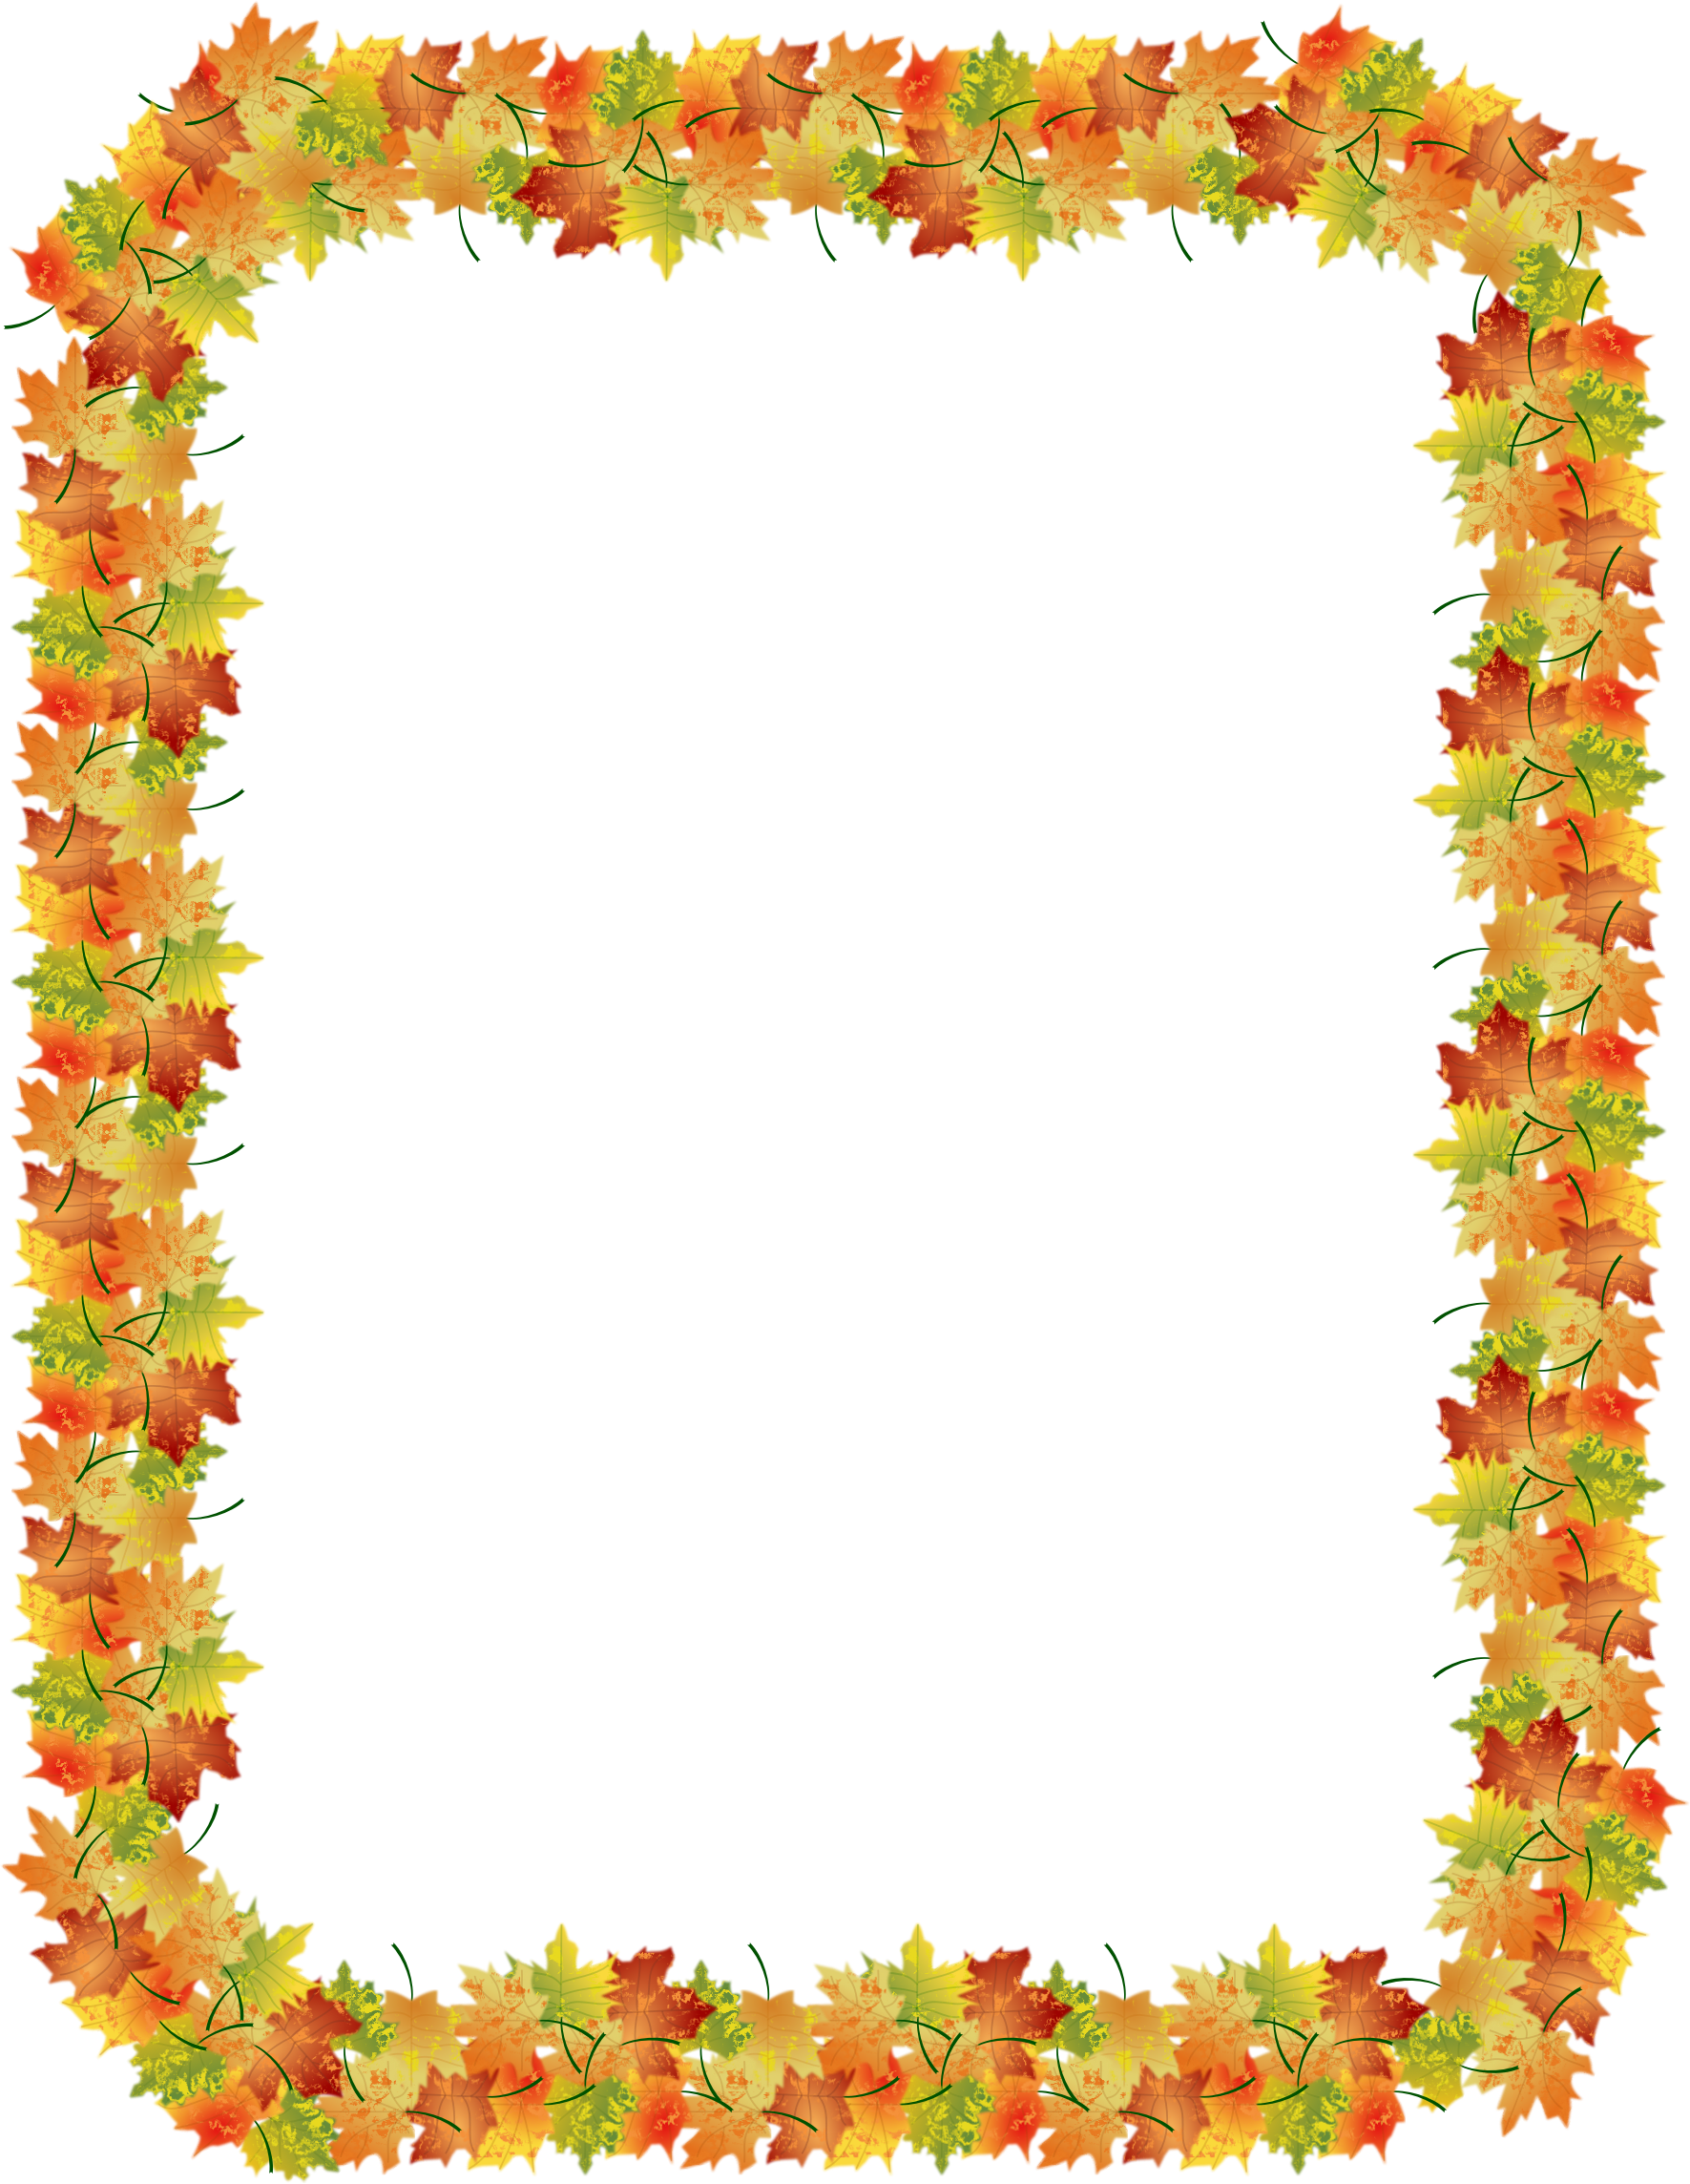 Fall border cliparts free. Clipart leaf boarder